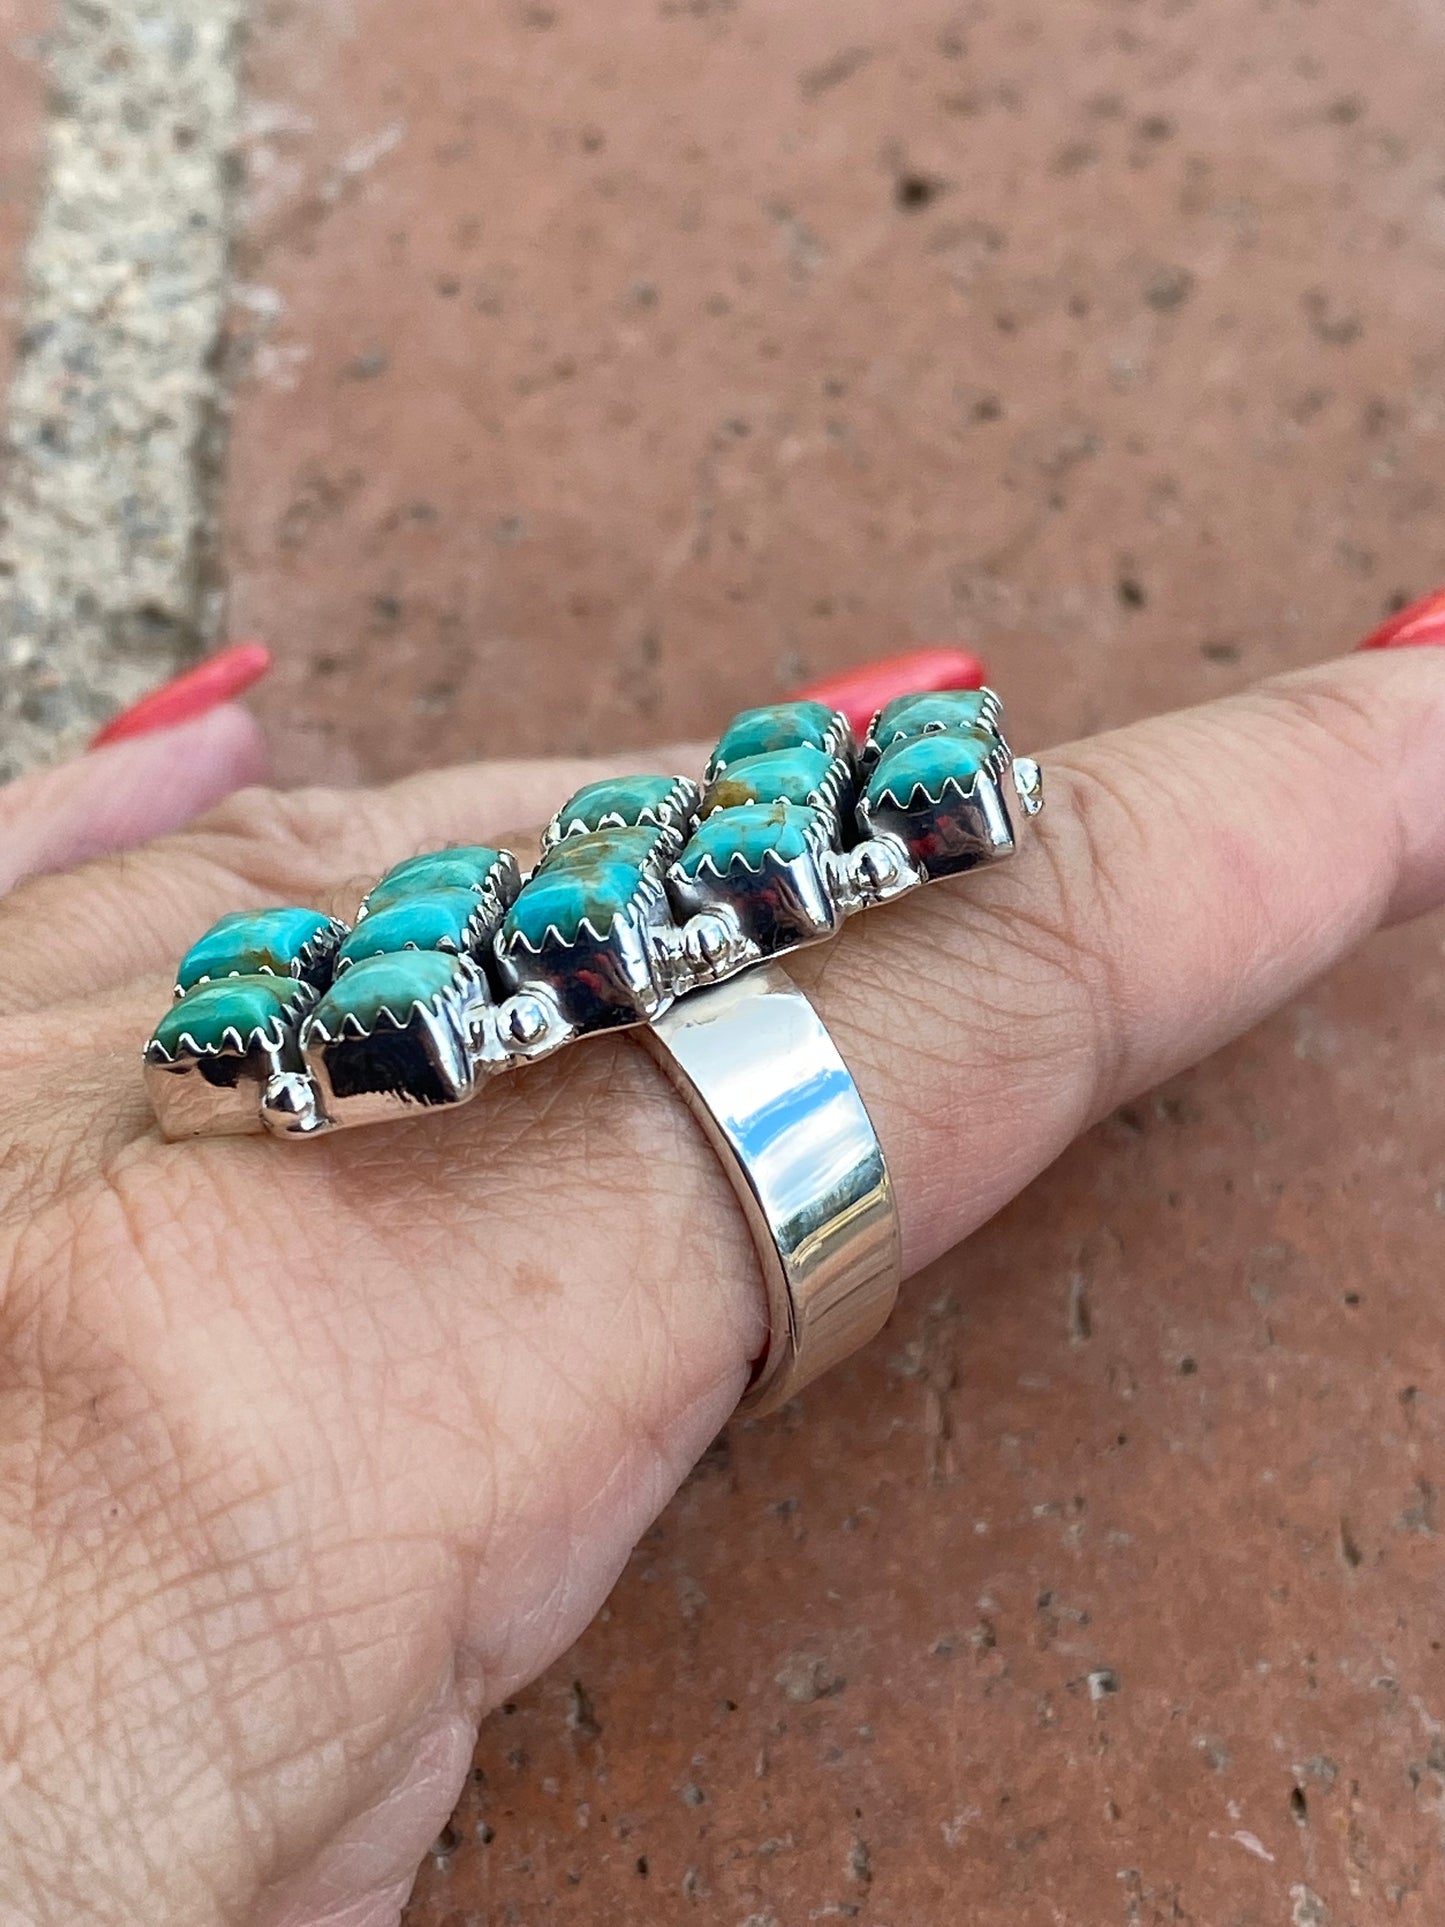 Nizhoni “The Andy” Handmade Kingman Turquoise And Sterling Silver Adjustable Ring